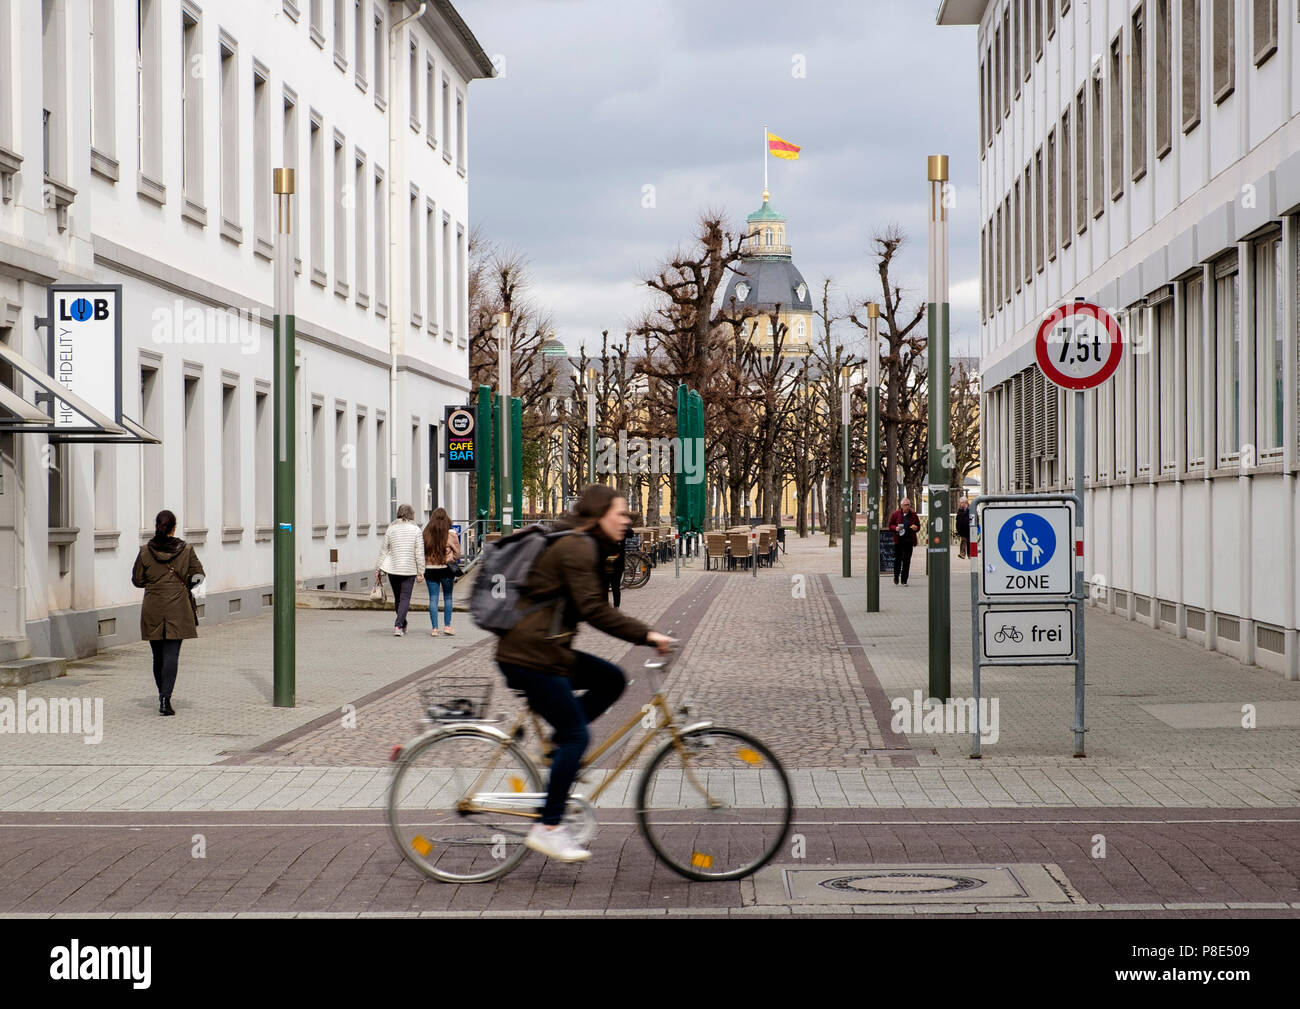 Woman cycling in the city centre of Karlsruhe with Karlsruhe Palace, Schloss Karlsruhe, in the background, Baden-Württemberg, Germany Stock Photo